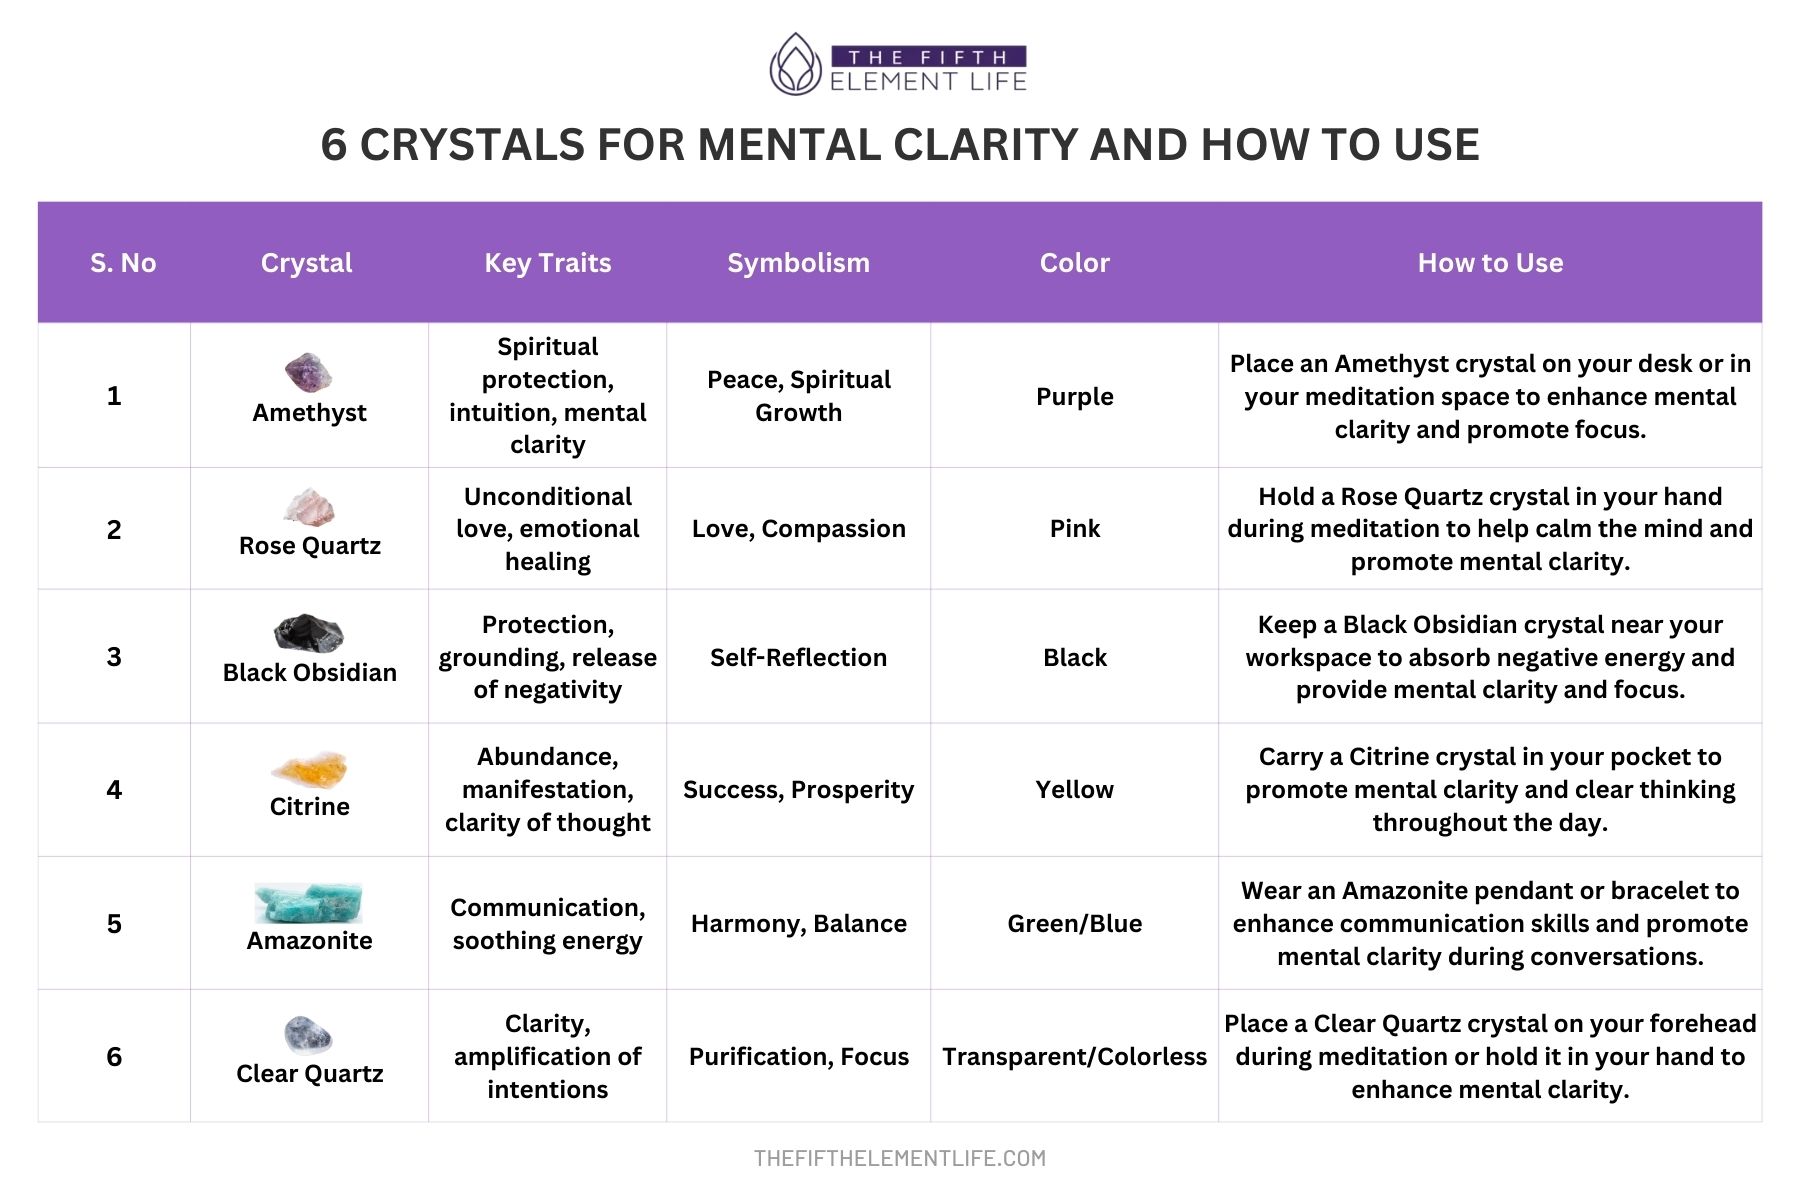 6 Crystals For Mental Clarity And How To Use